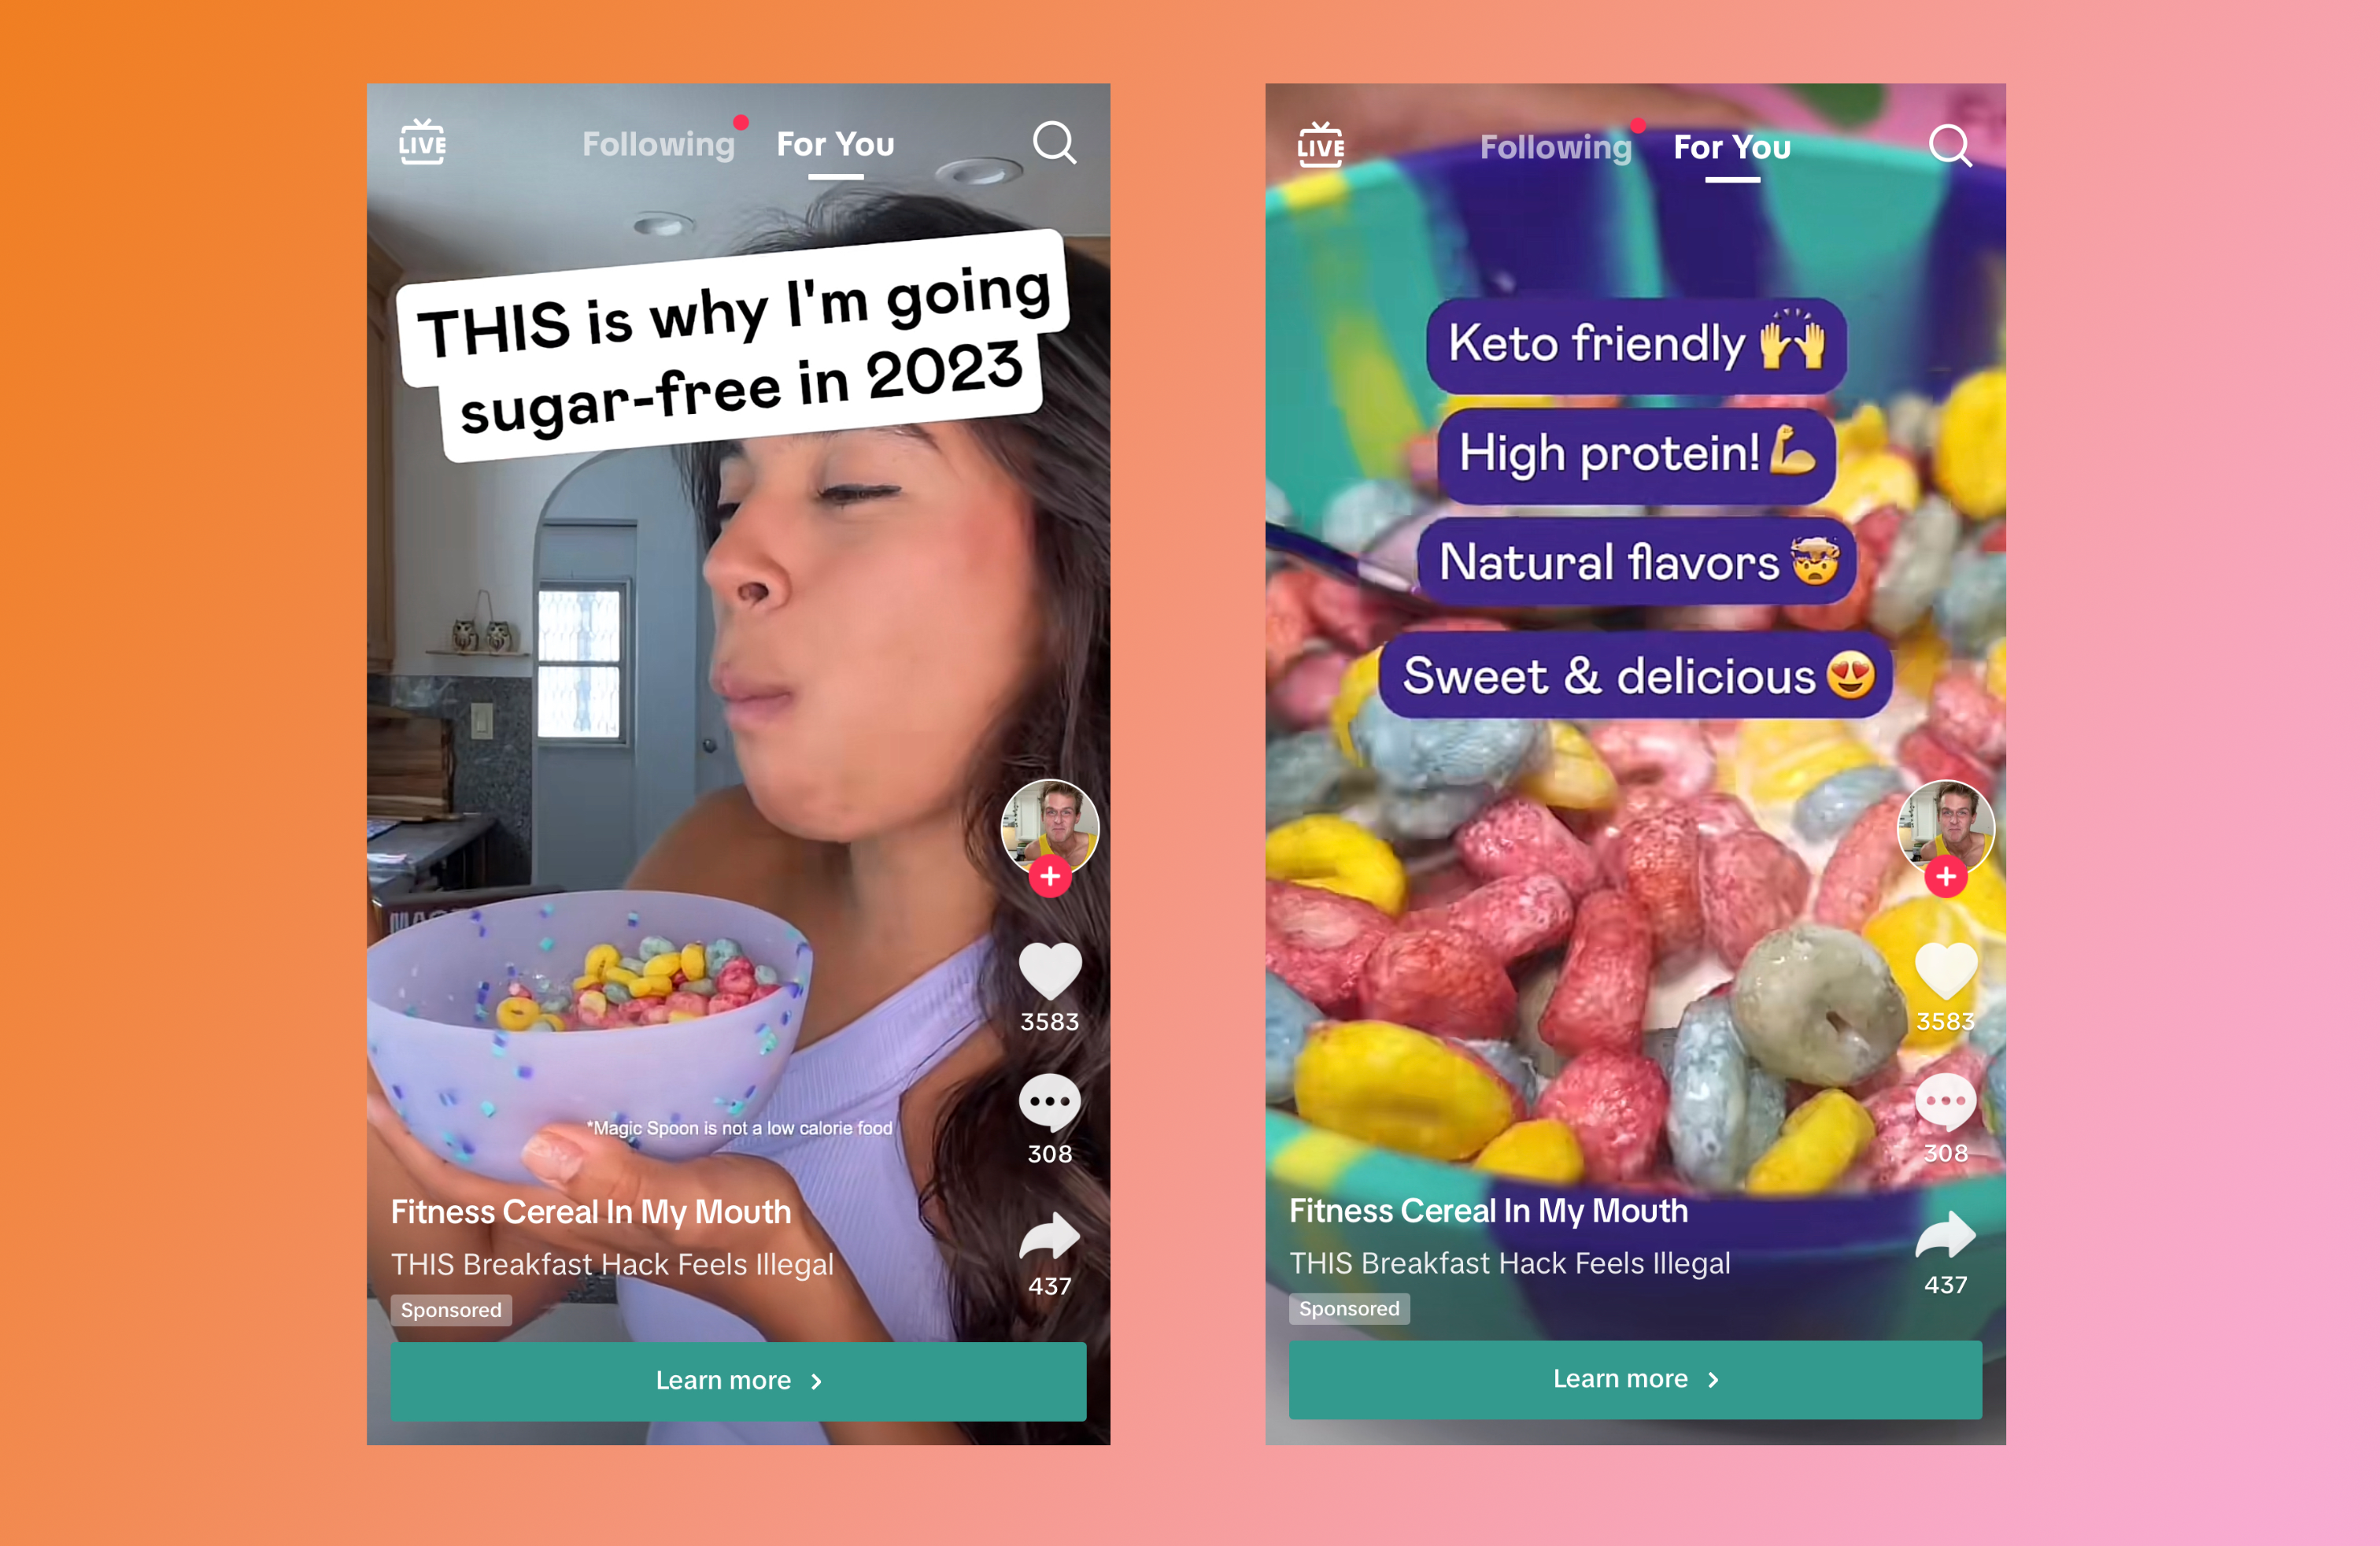 Example of a TikTok ad from brand Magic Spoon